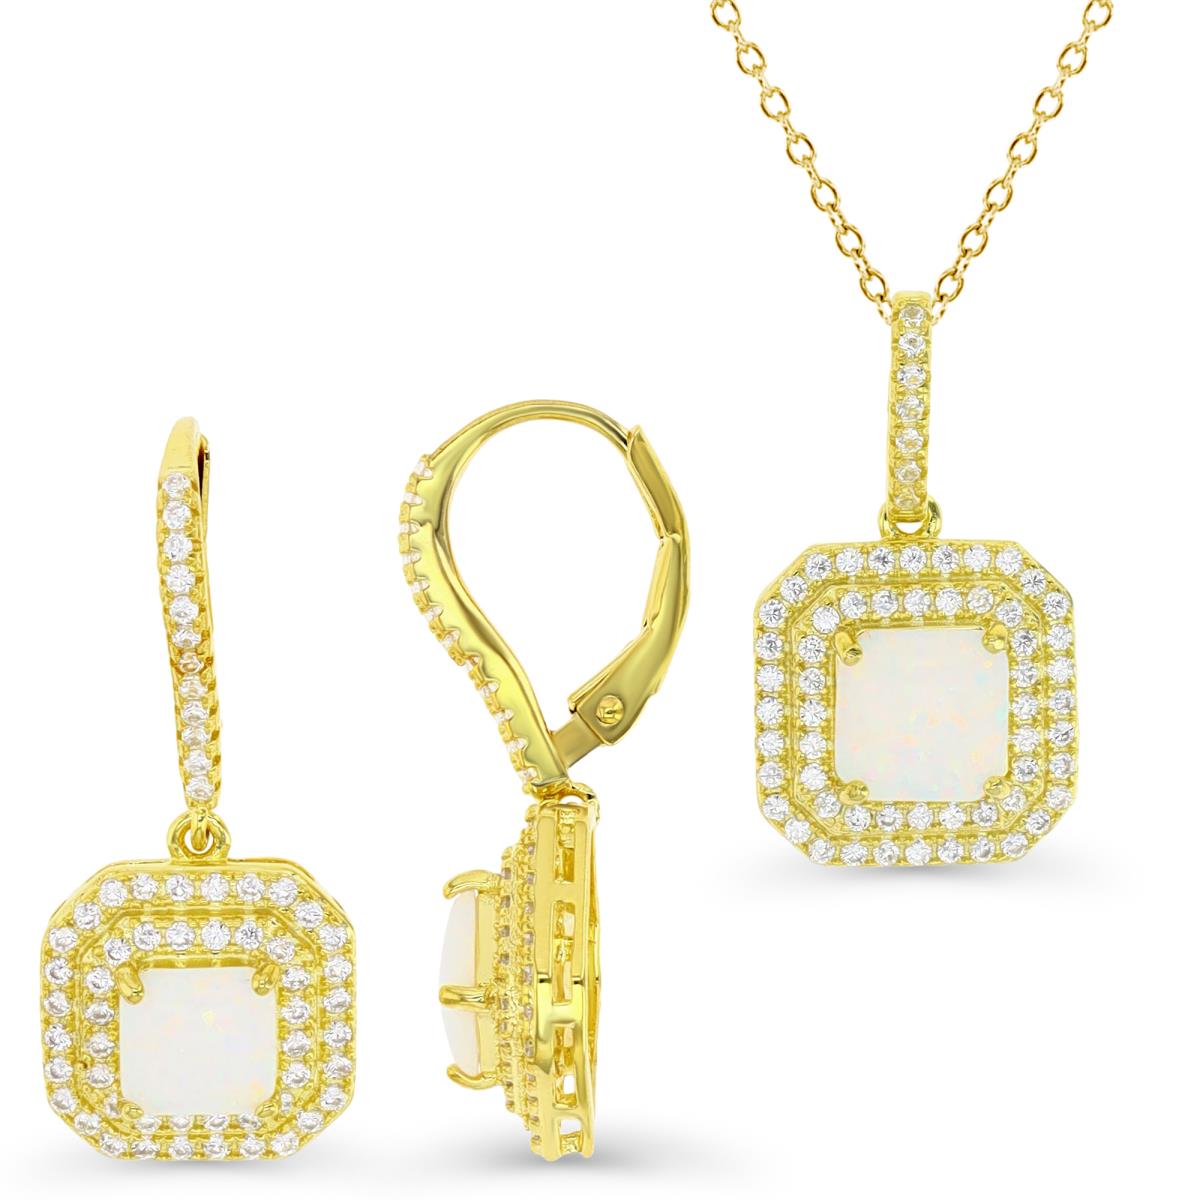 Sterling Silver Yellow & CU Ct. Cr. White Opal and White CZ Halo Earrings and 18" Necklace Set